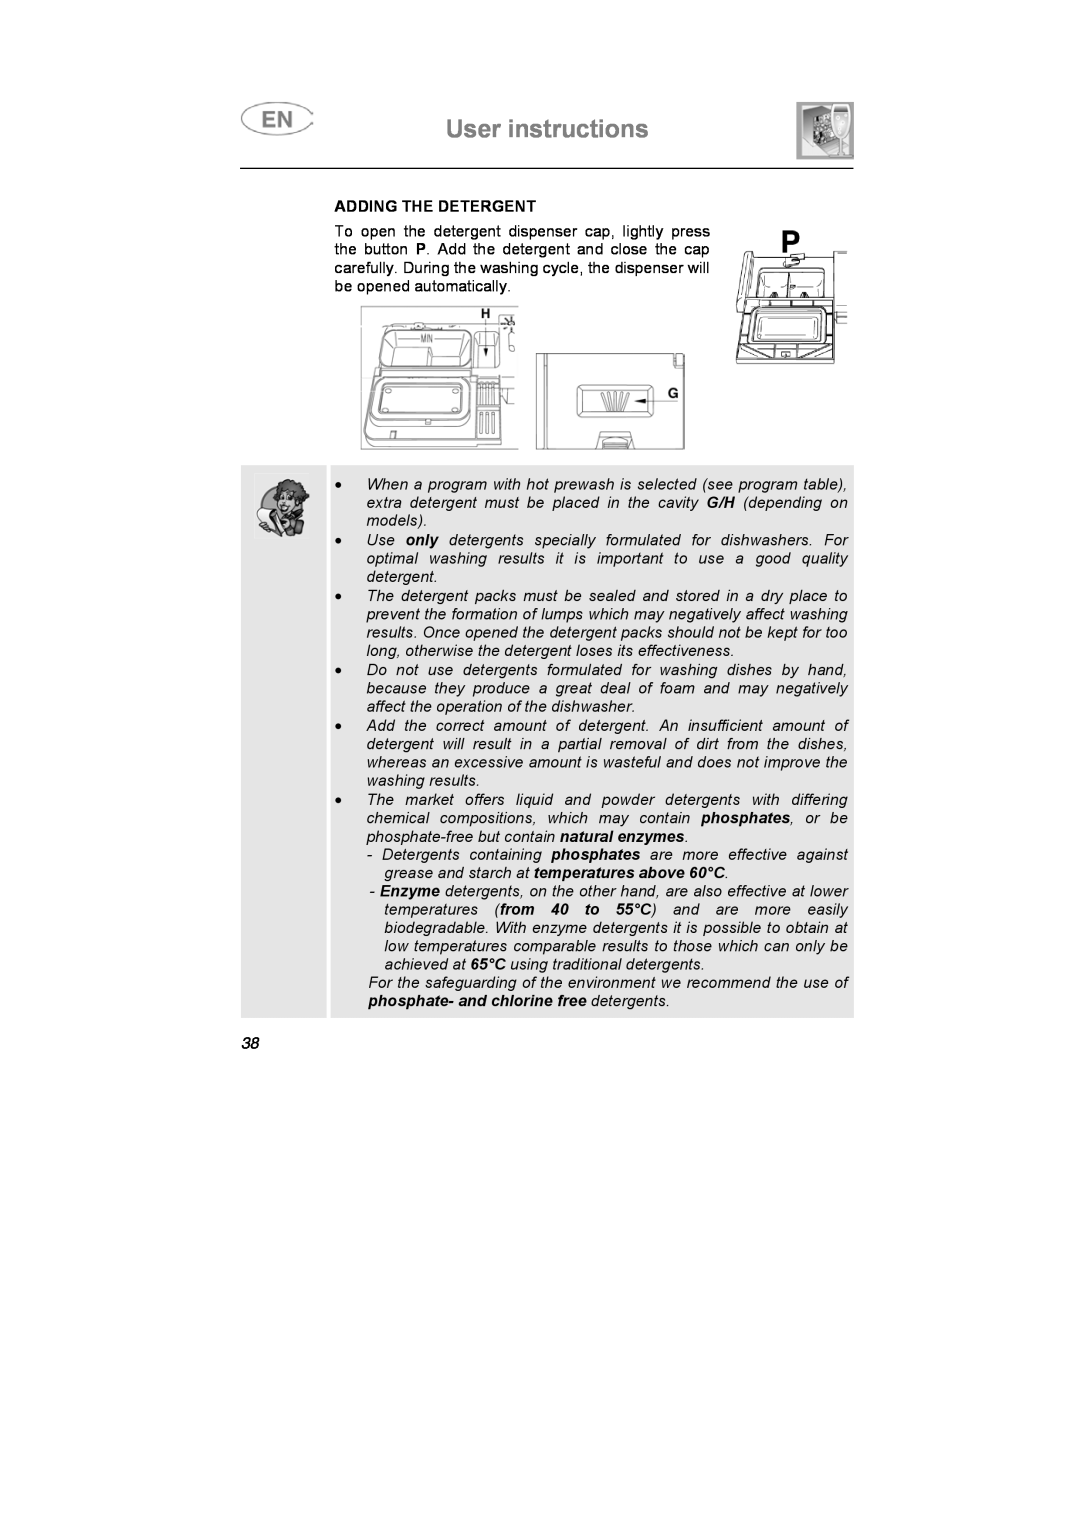 CDA VW80 manual Adding The Detergent, User instructions 